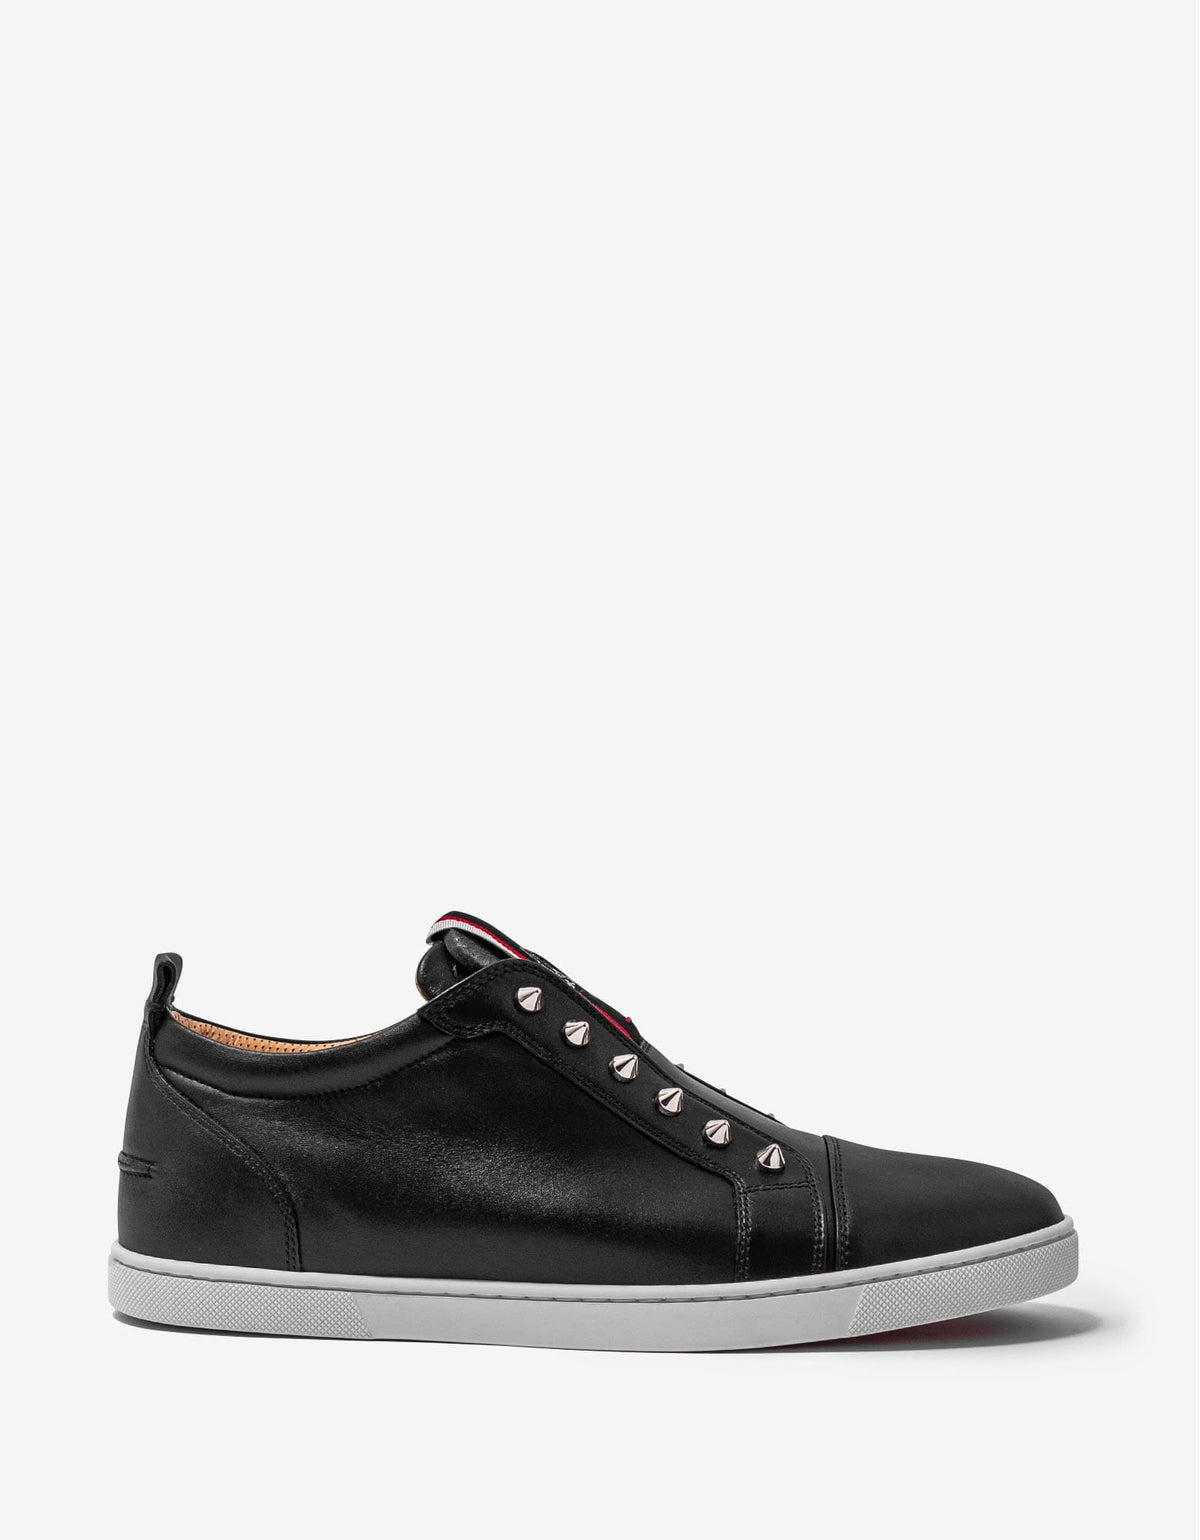 Christian Louboutin F.A.V Fique A Vontade Black Leather Trainers -